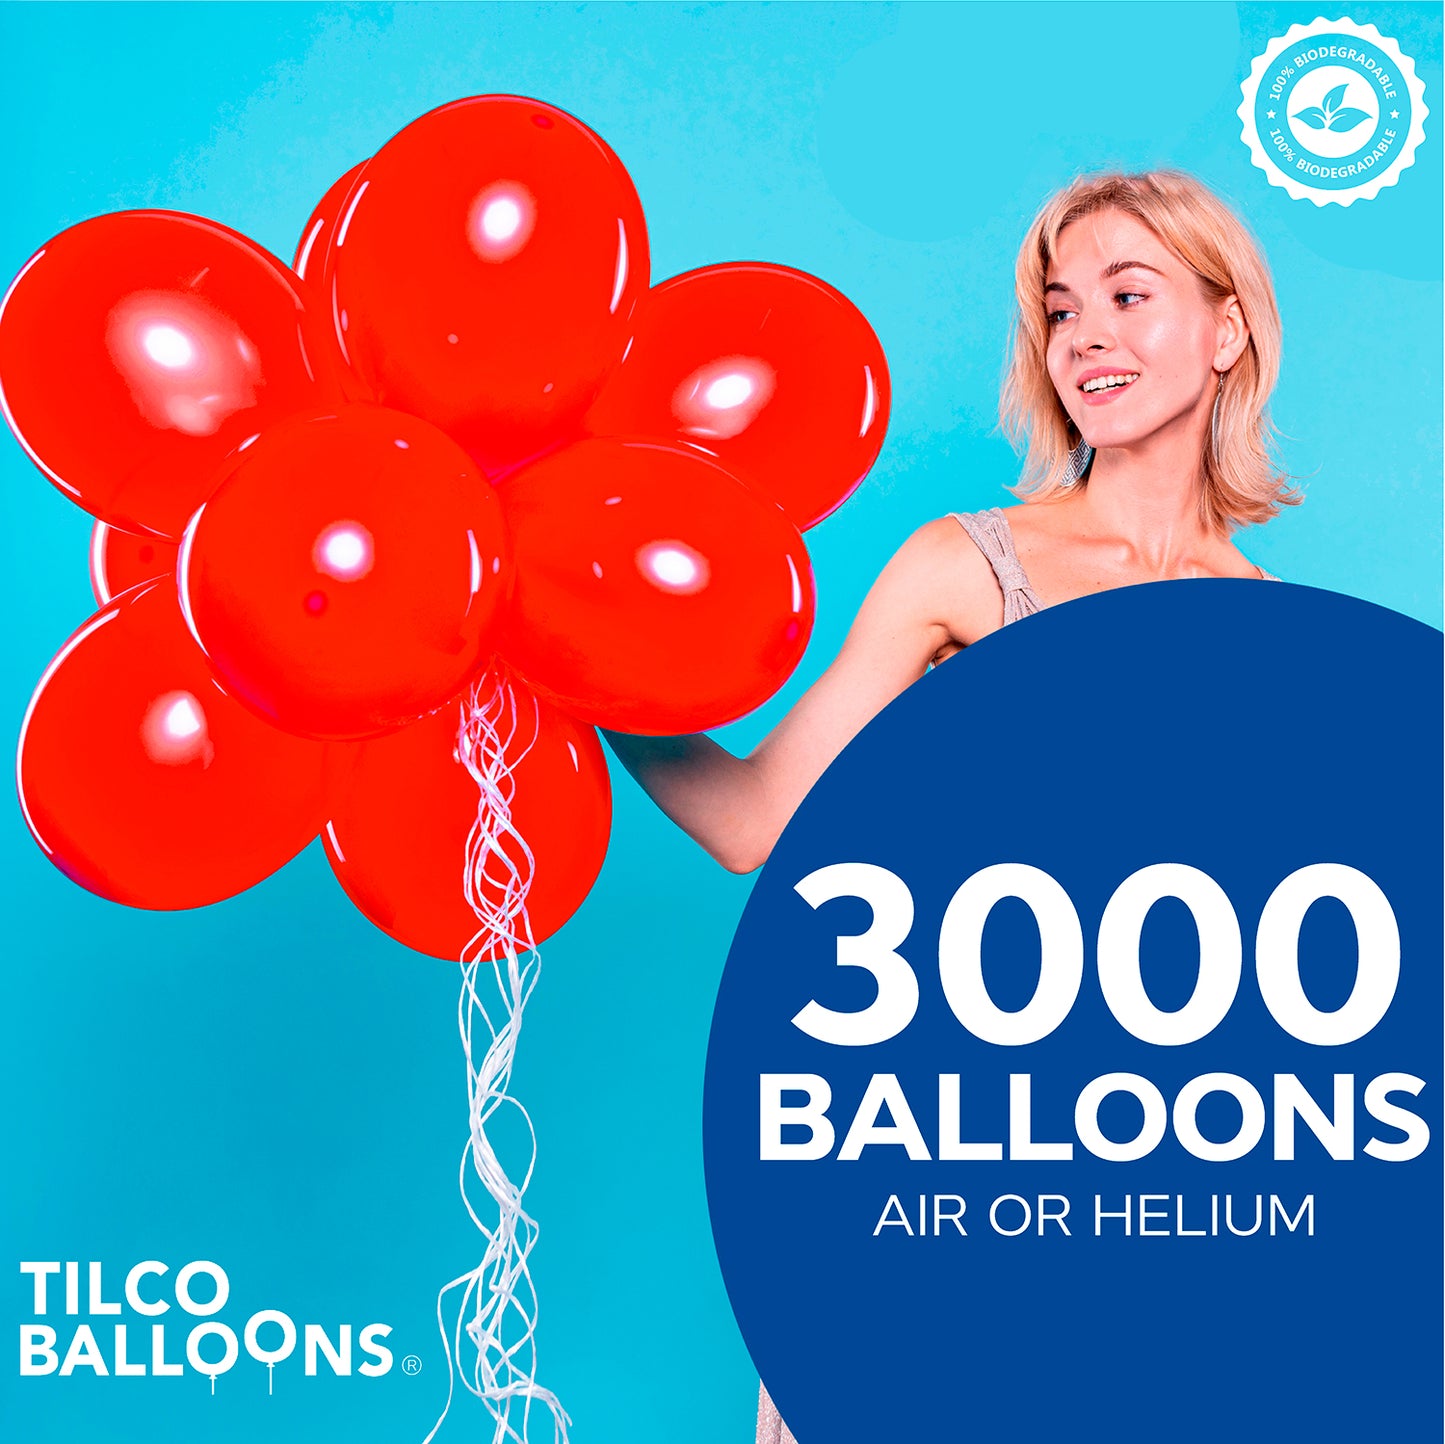 3000 scarlet red balloons for air or helium